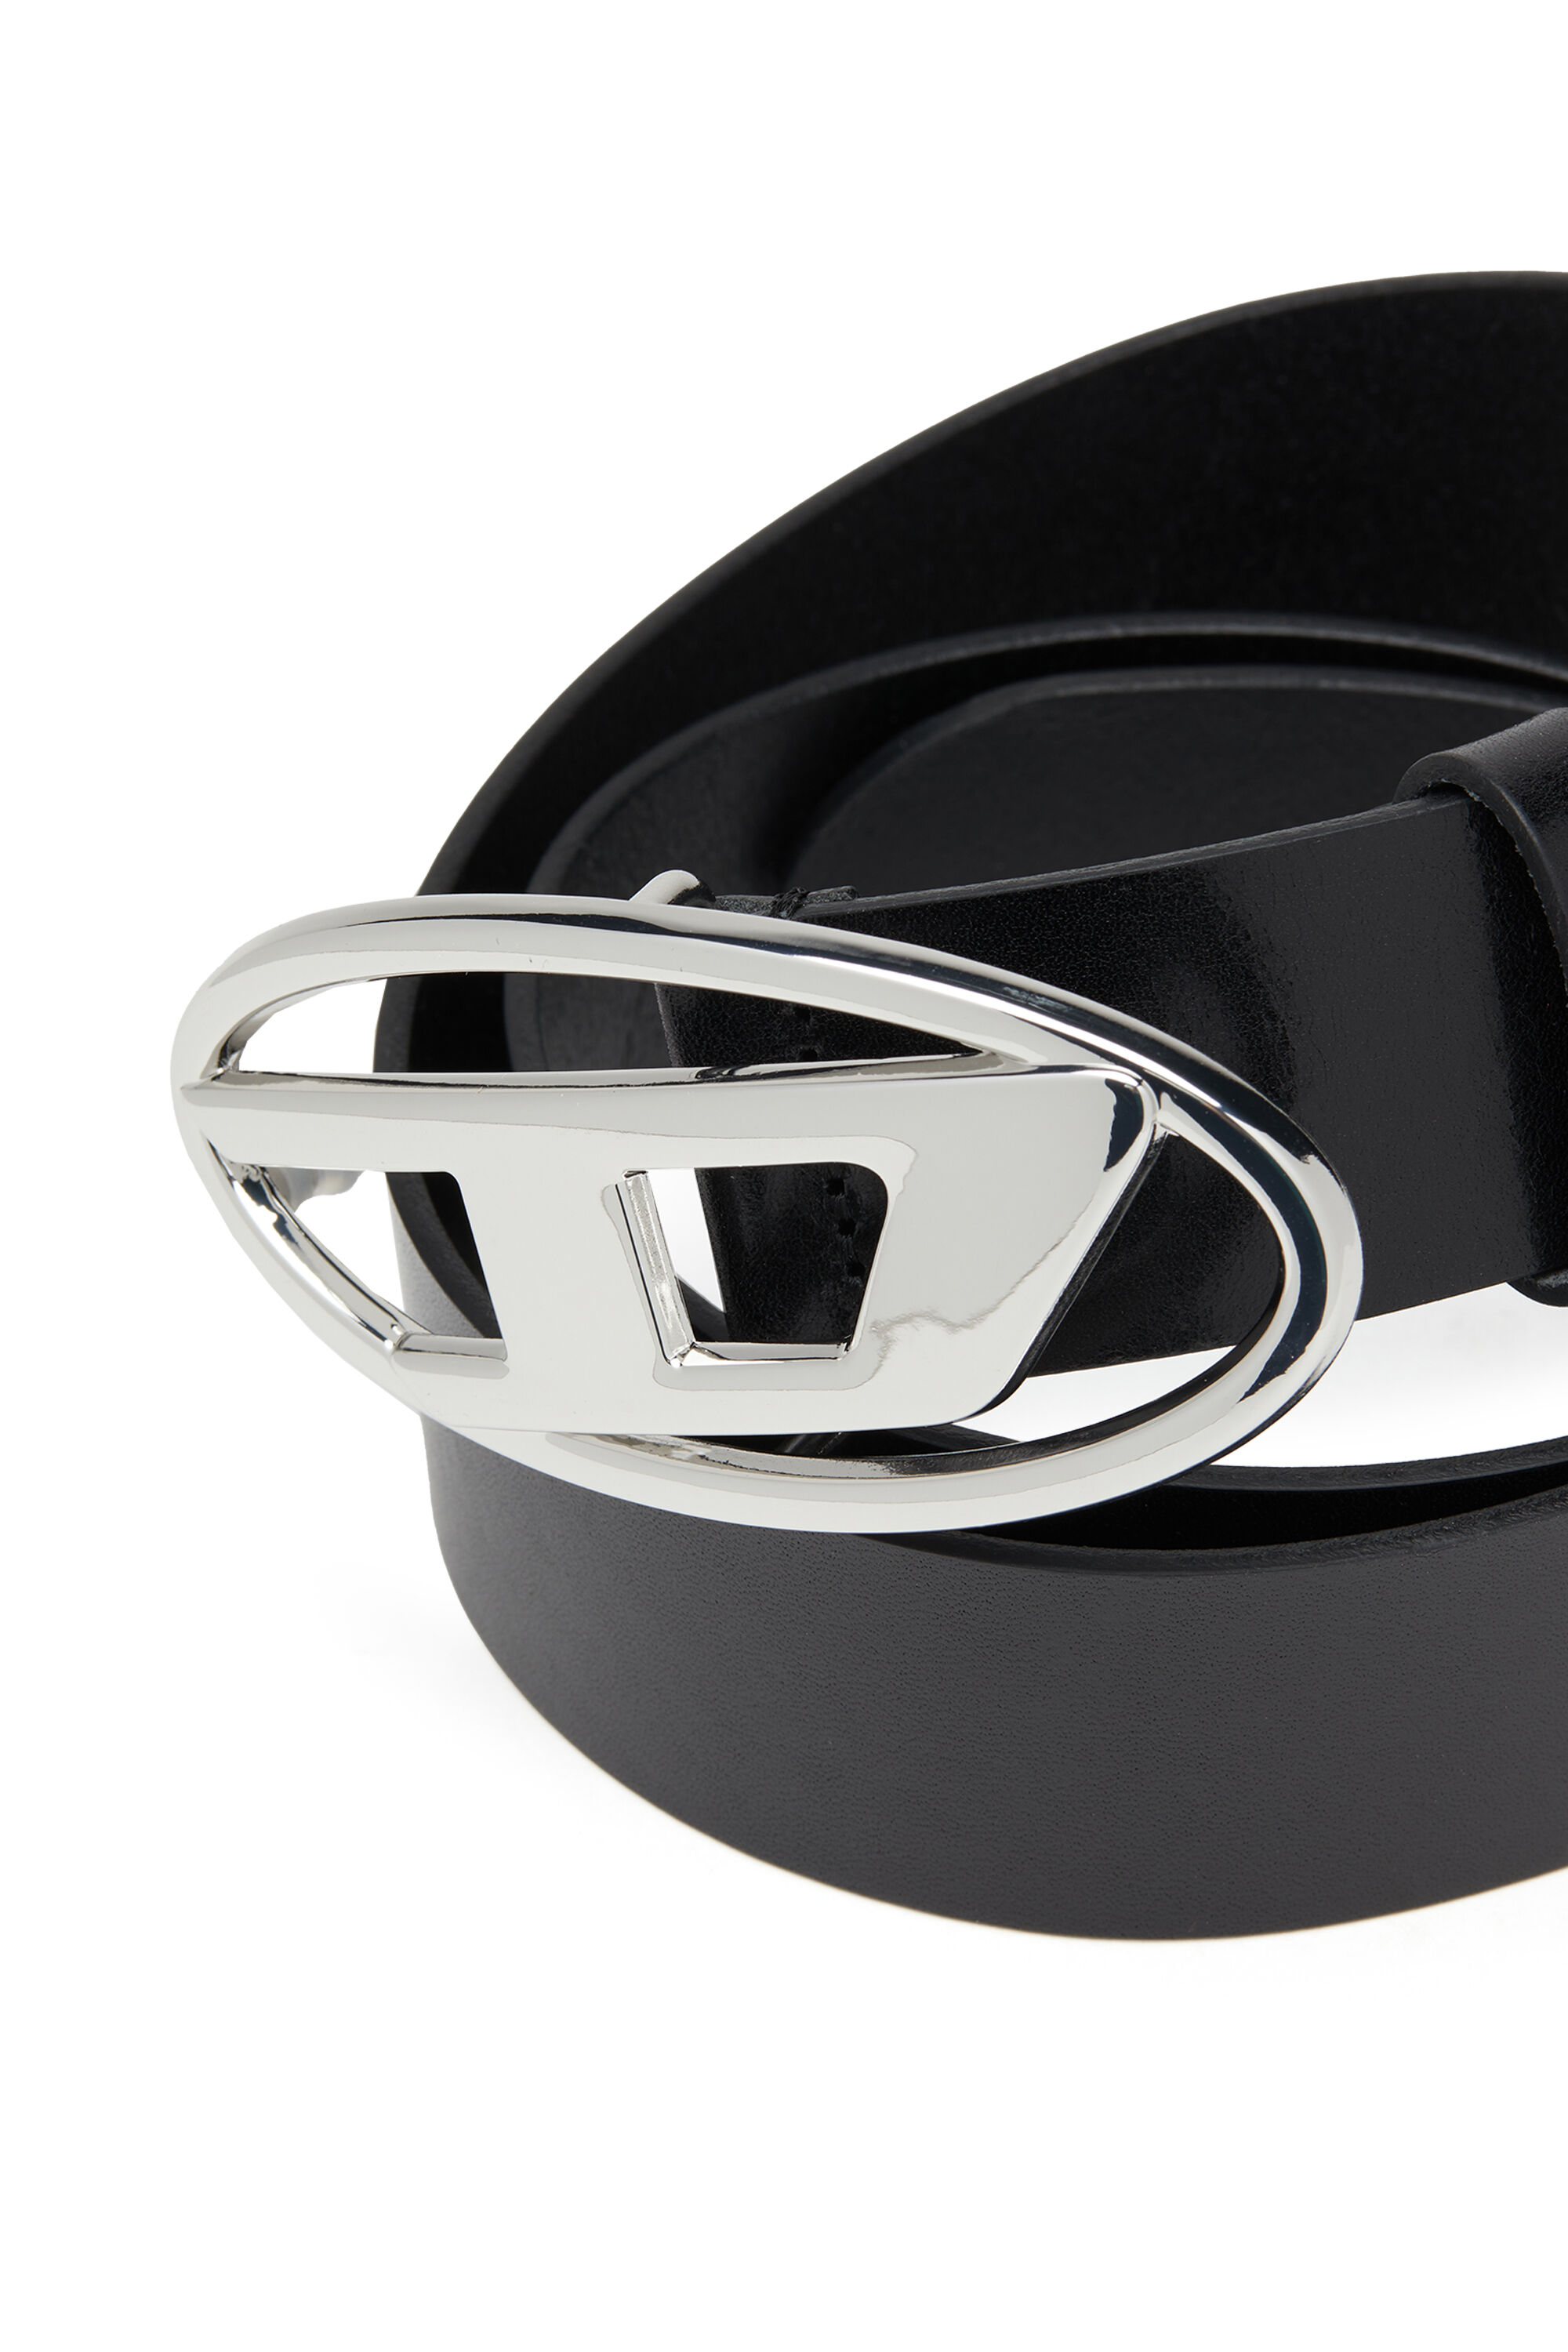 B-1DR Woman: leather Belt buckle D | logo silver with Diesel